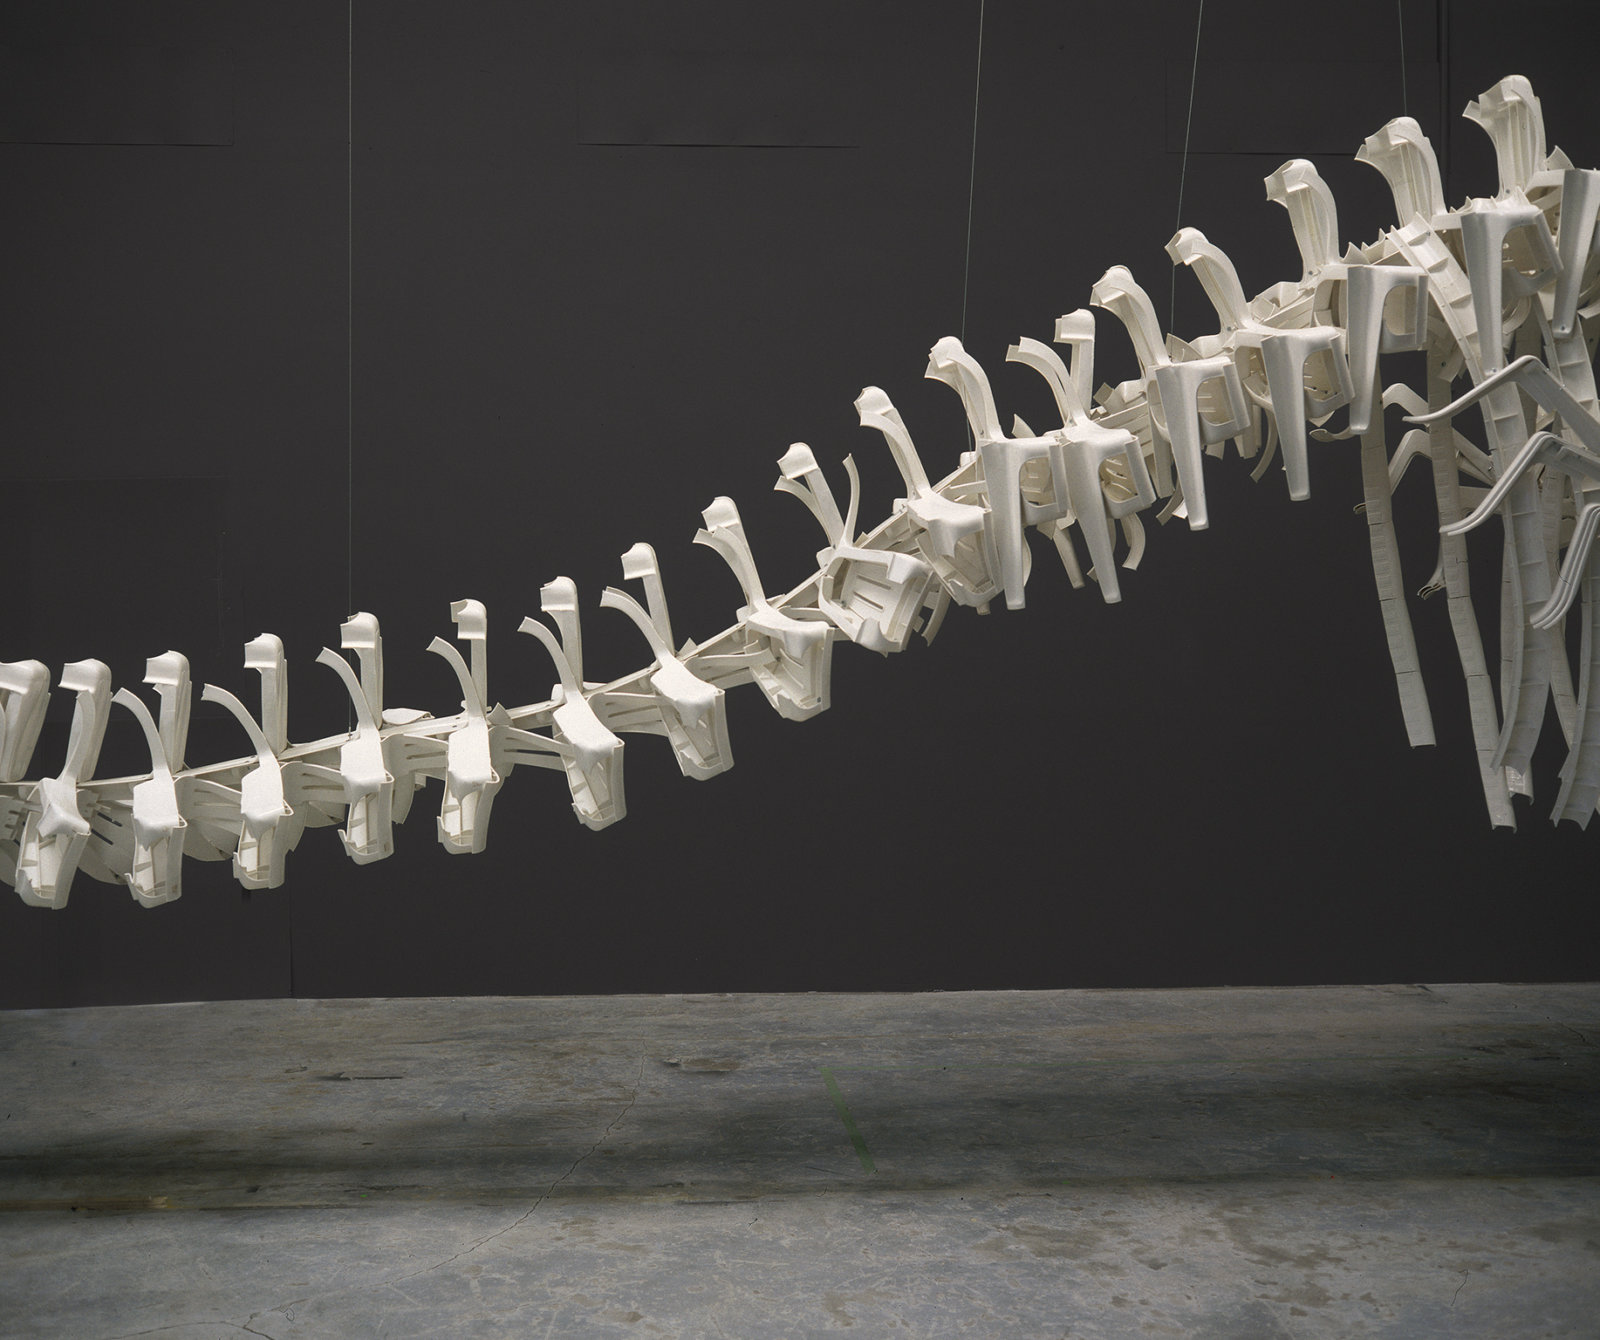 Brian Jungen, Cetology (detail), 2002, plastic chairs, 159 x 166 x 587 in. (404 x 422 x 1491 cm)